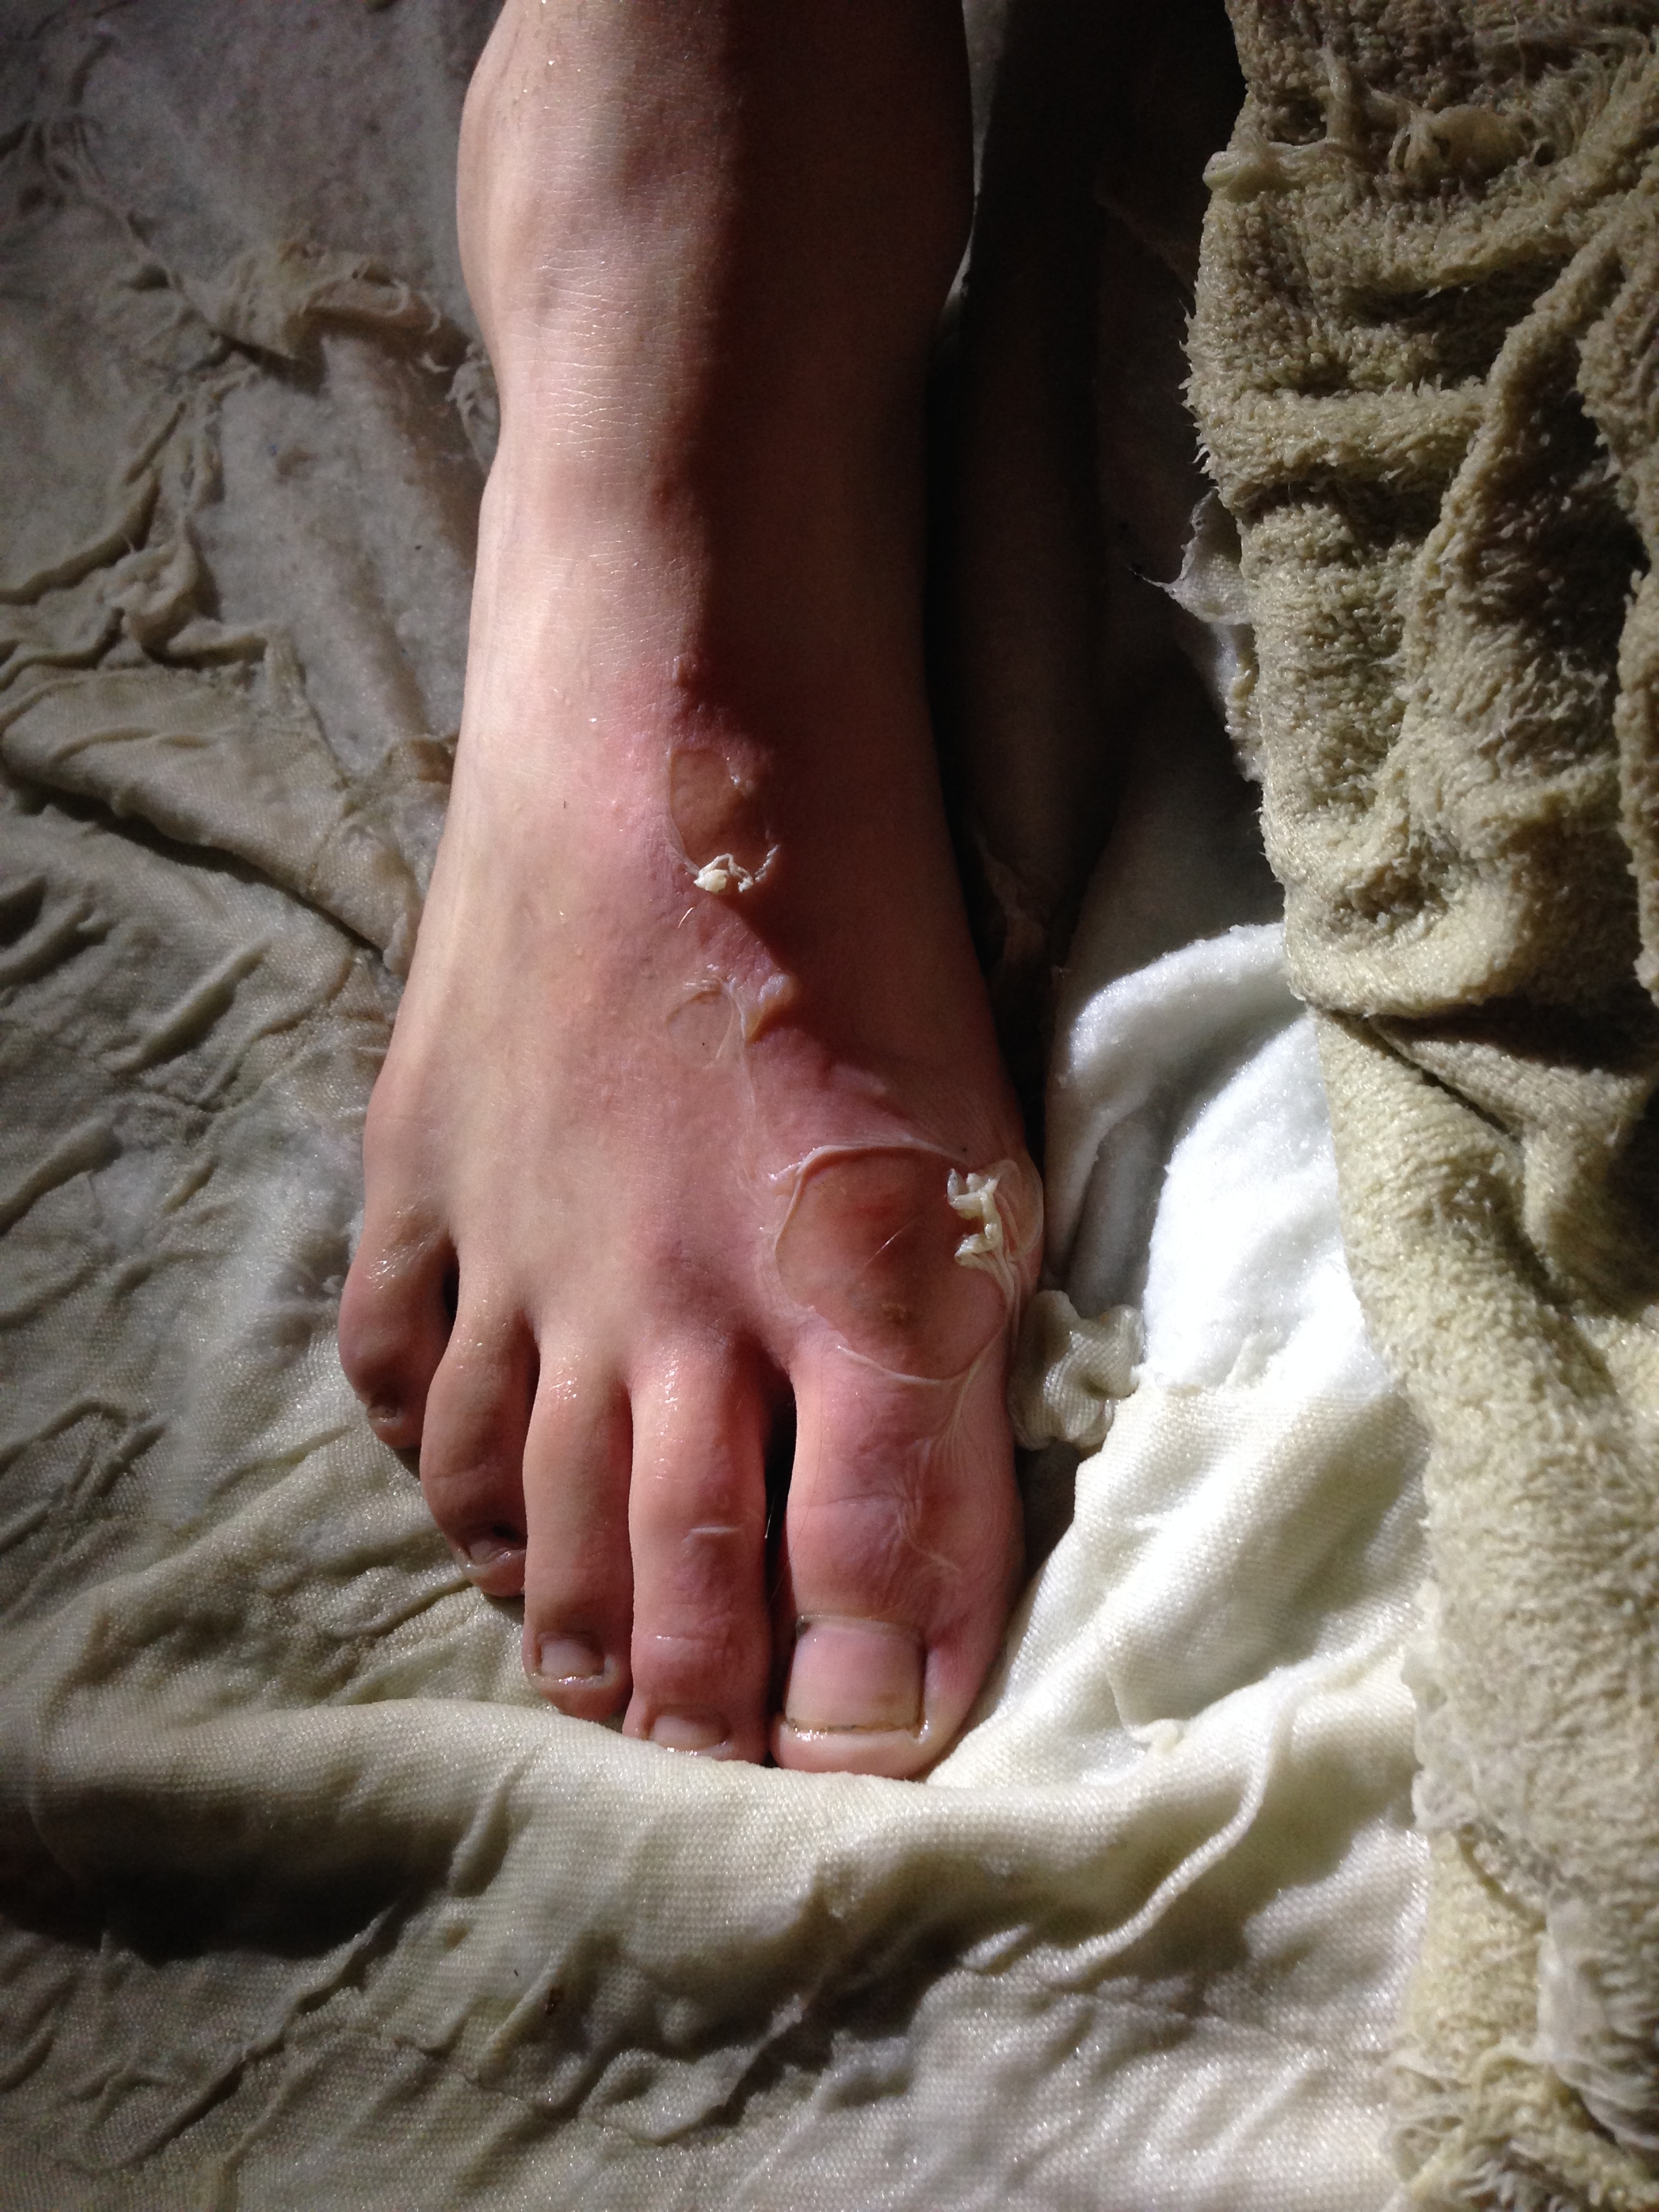 Badly Burned Foot of Amish Boy Before First Aid B & W Ointment